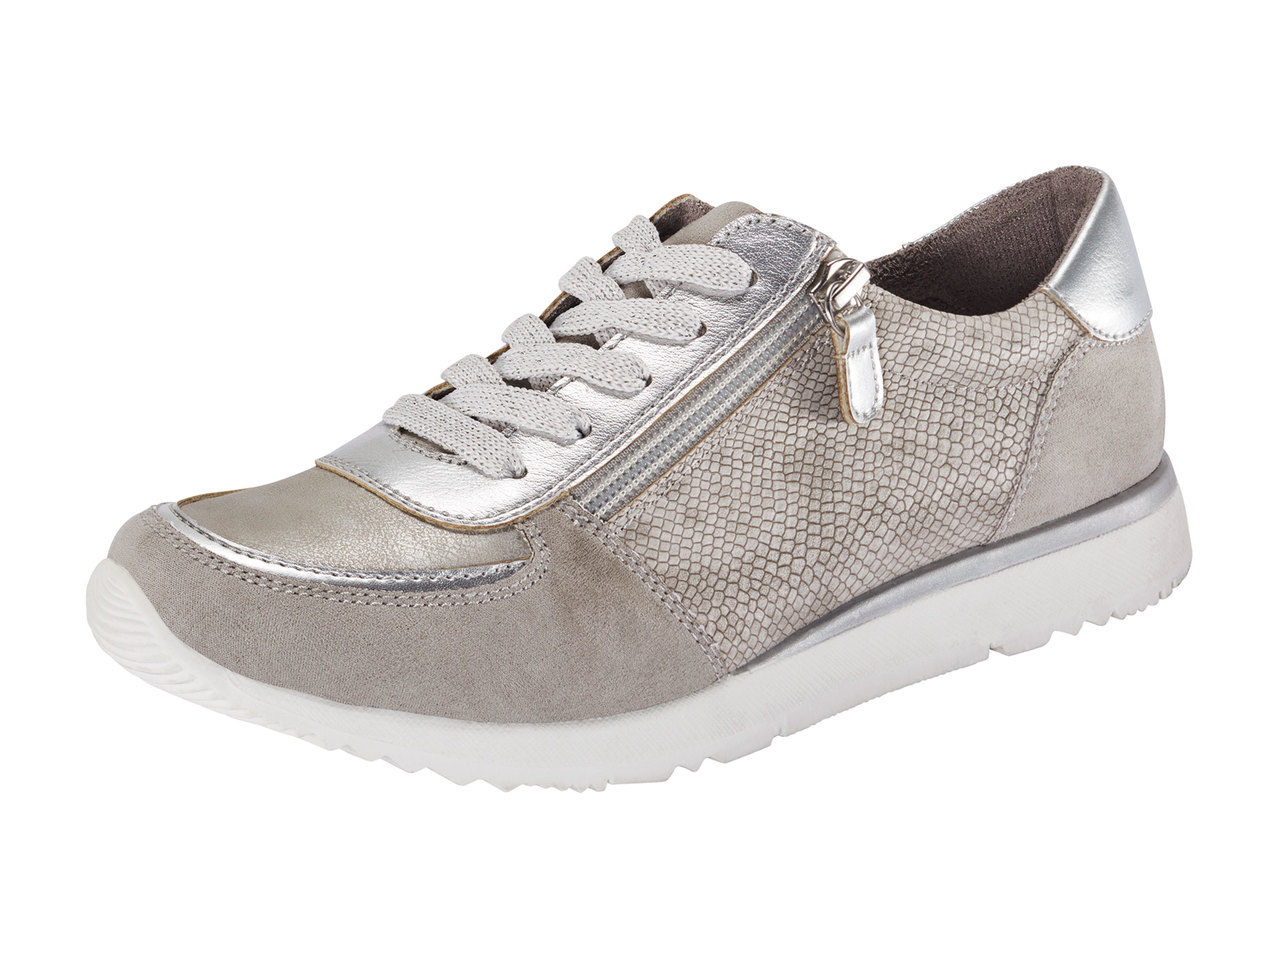 Footflexx Casual Shoes1 - Lidl — Great Britain - Specials archive